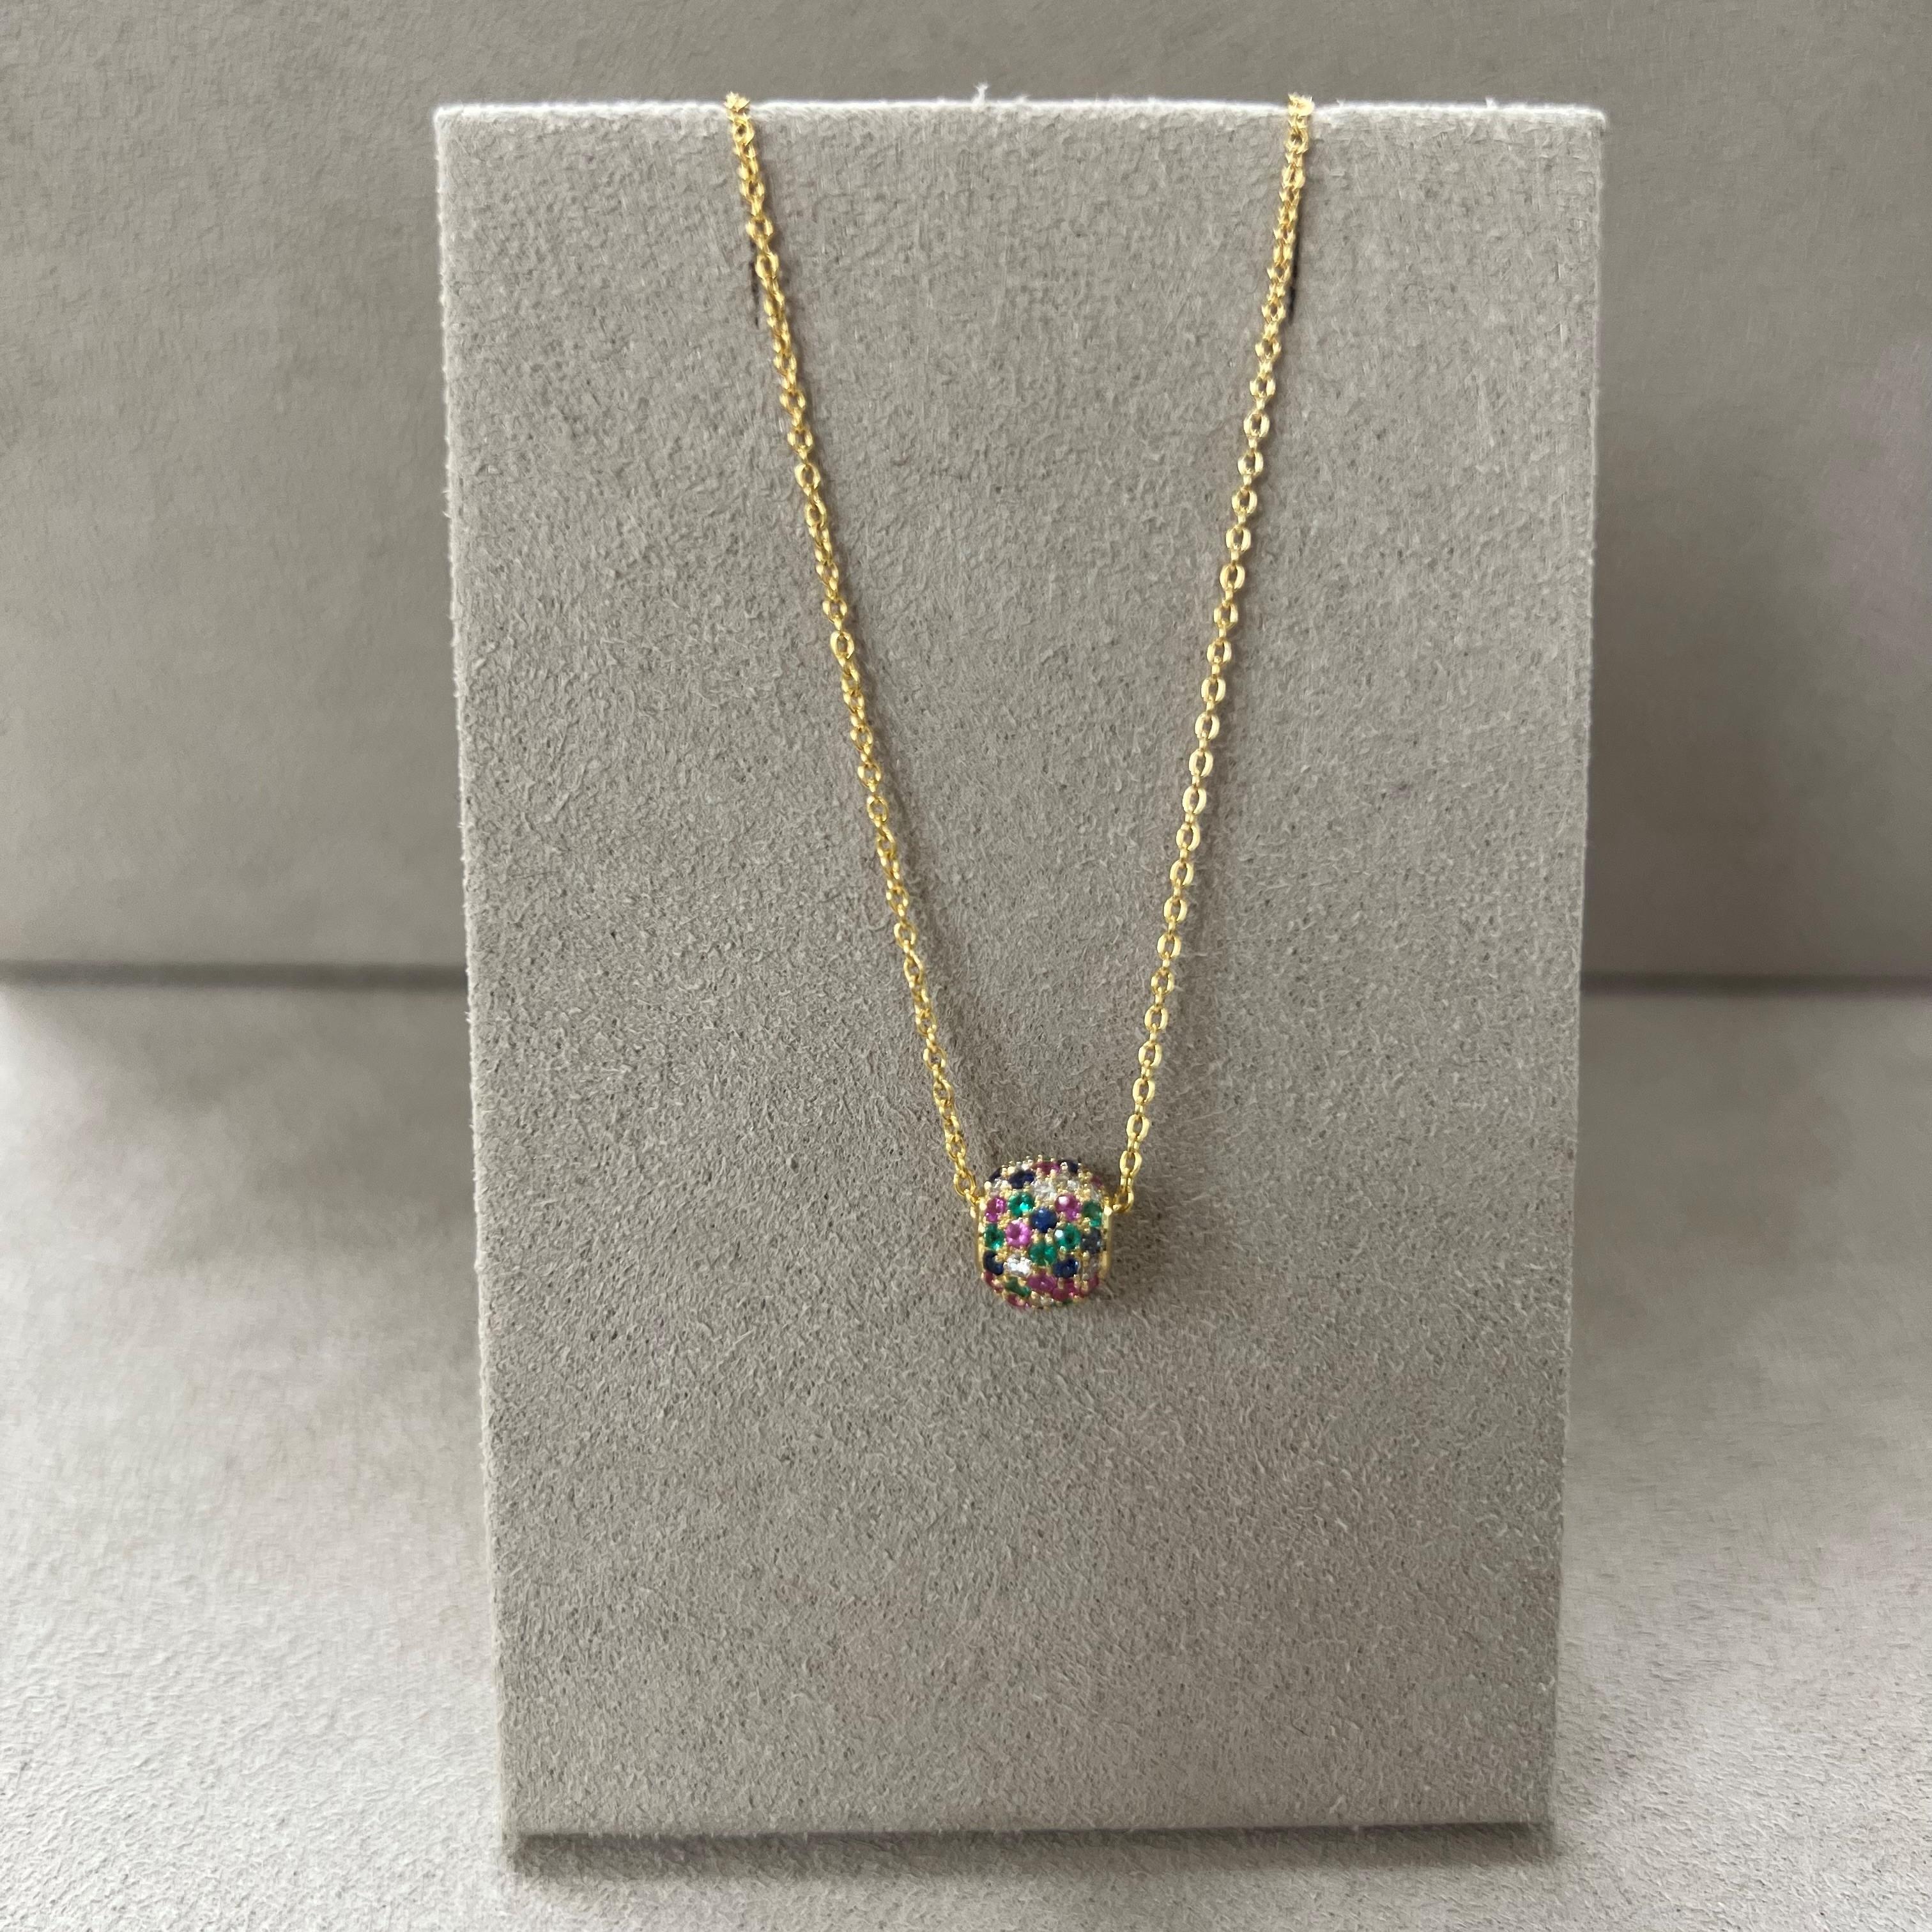 Created in 18 karat yellow gold
Emerald 0.10 carat approx.
Multi color Sapphires 0.40 carat approx.
Diamonds 0.15 carat approx.
18kyg 18 inch chain with 18kyg lobster lock
The chain can be worn at 17 & 16 inches as well



About the Designers ~